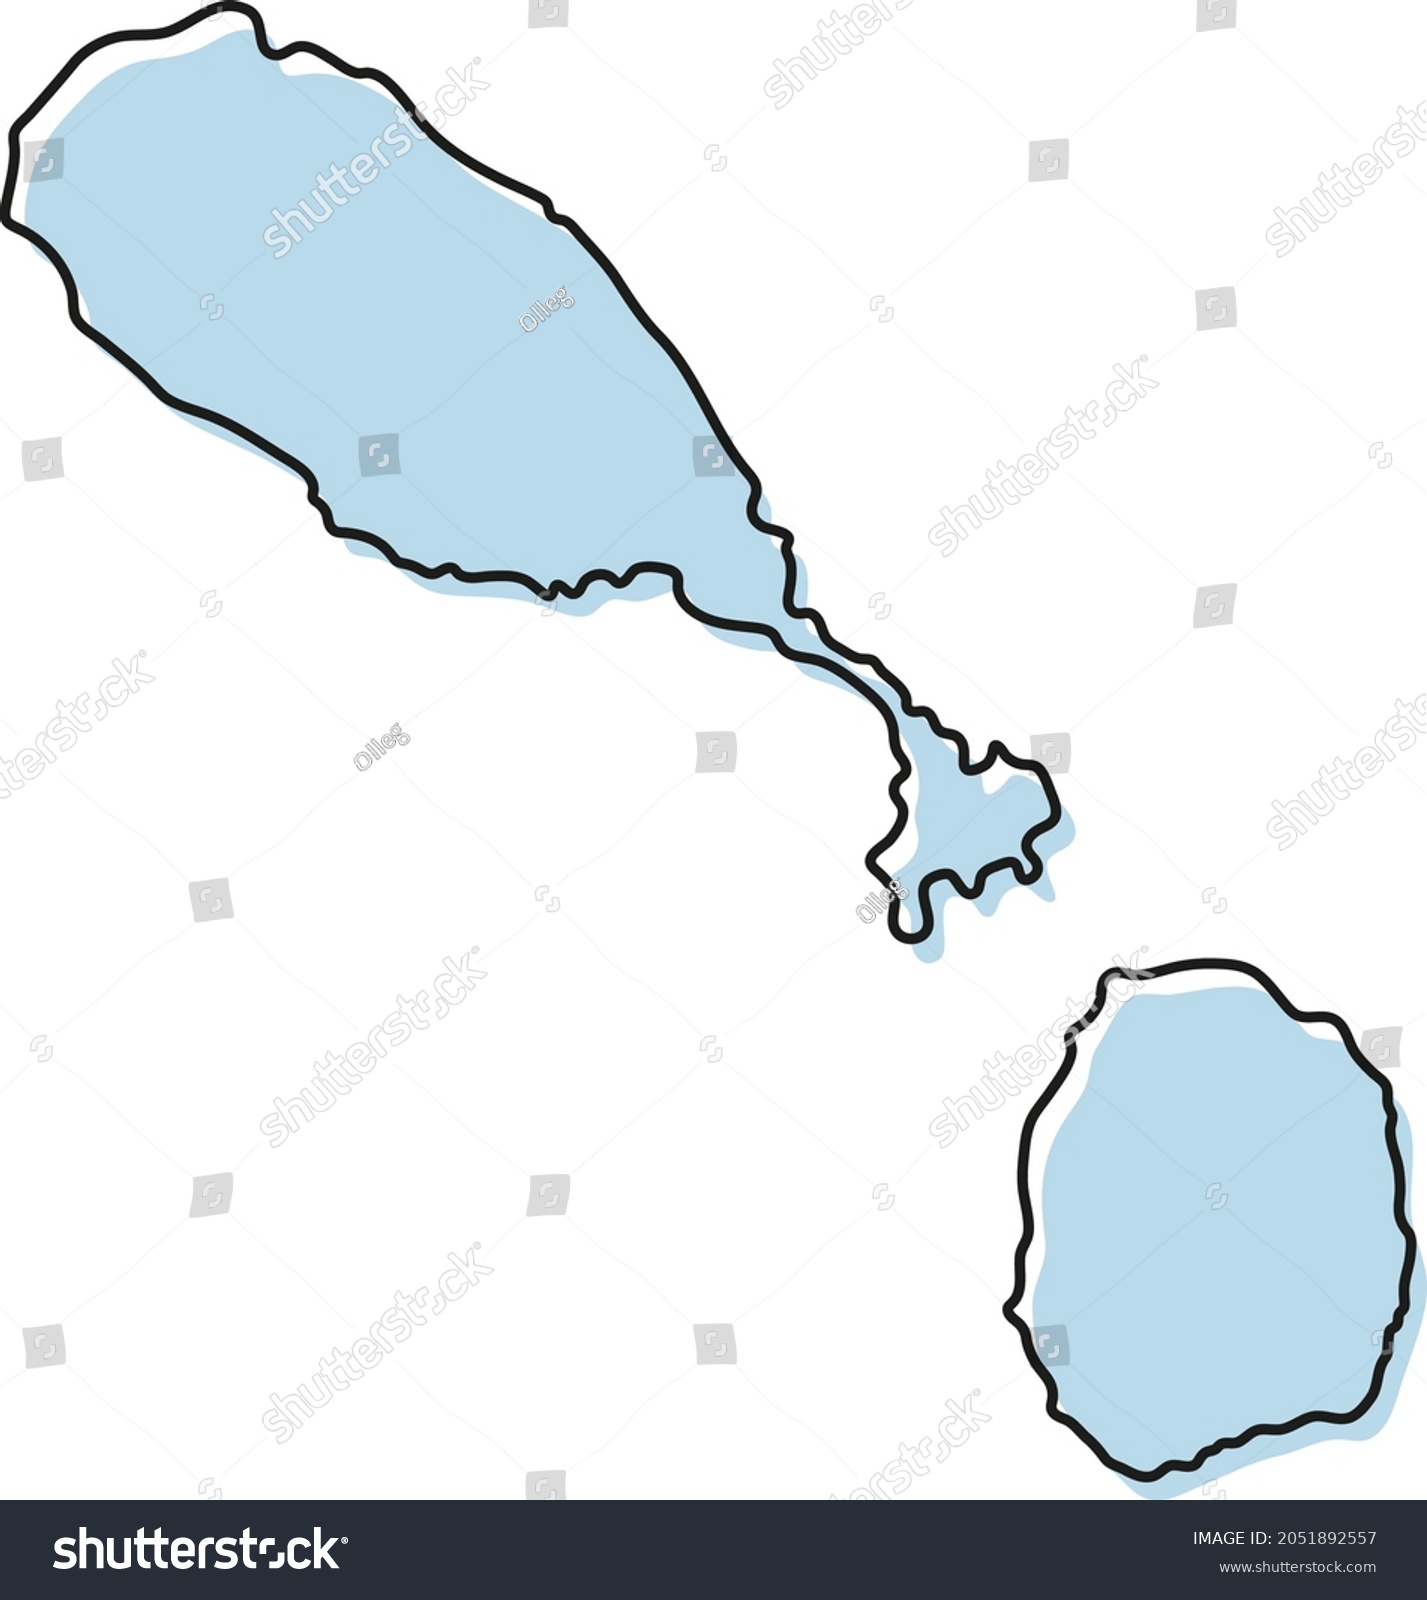 Stylized Simple Outline Map Of Saint Kitts And Royalty Free Stock Vector 2051892557